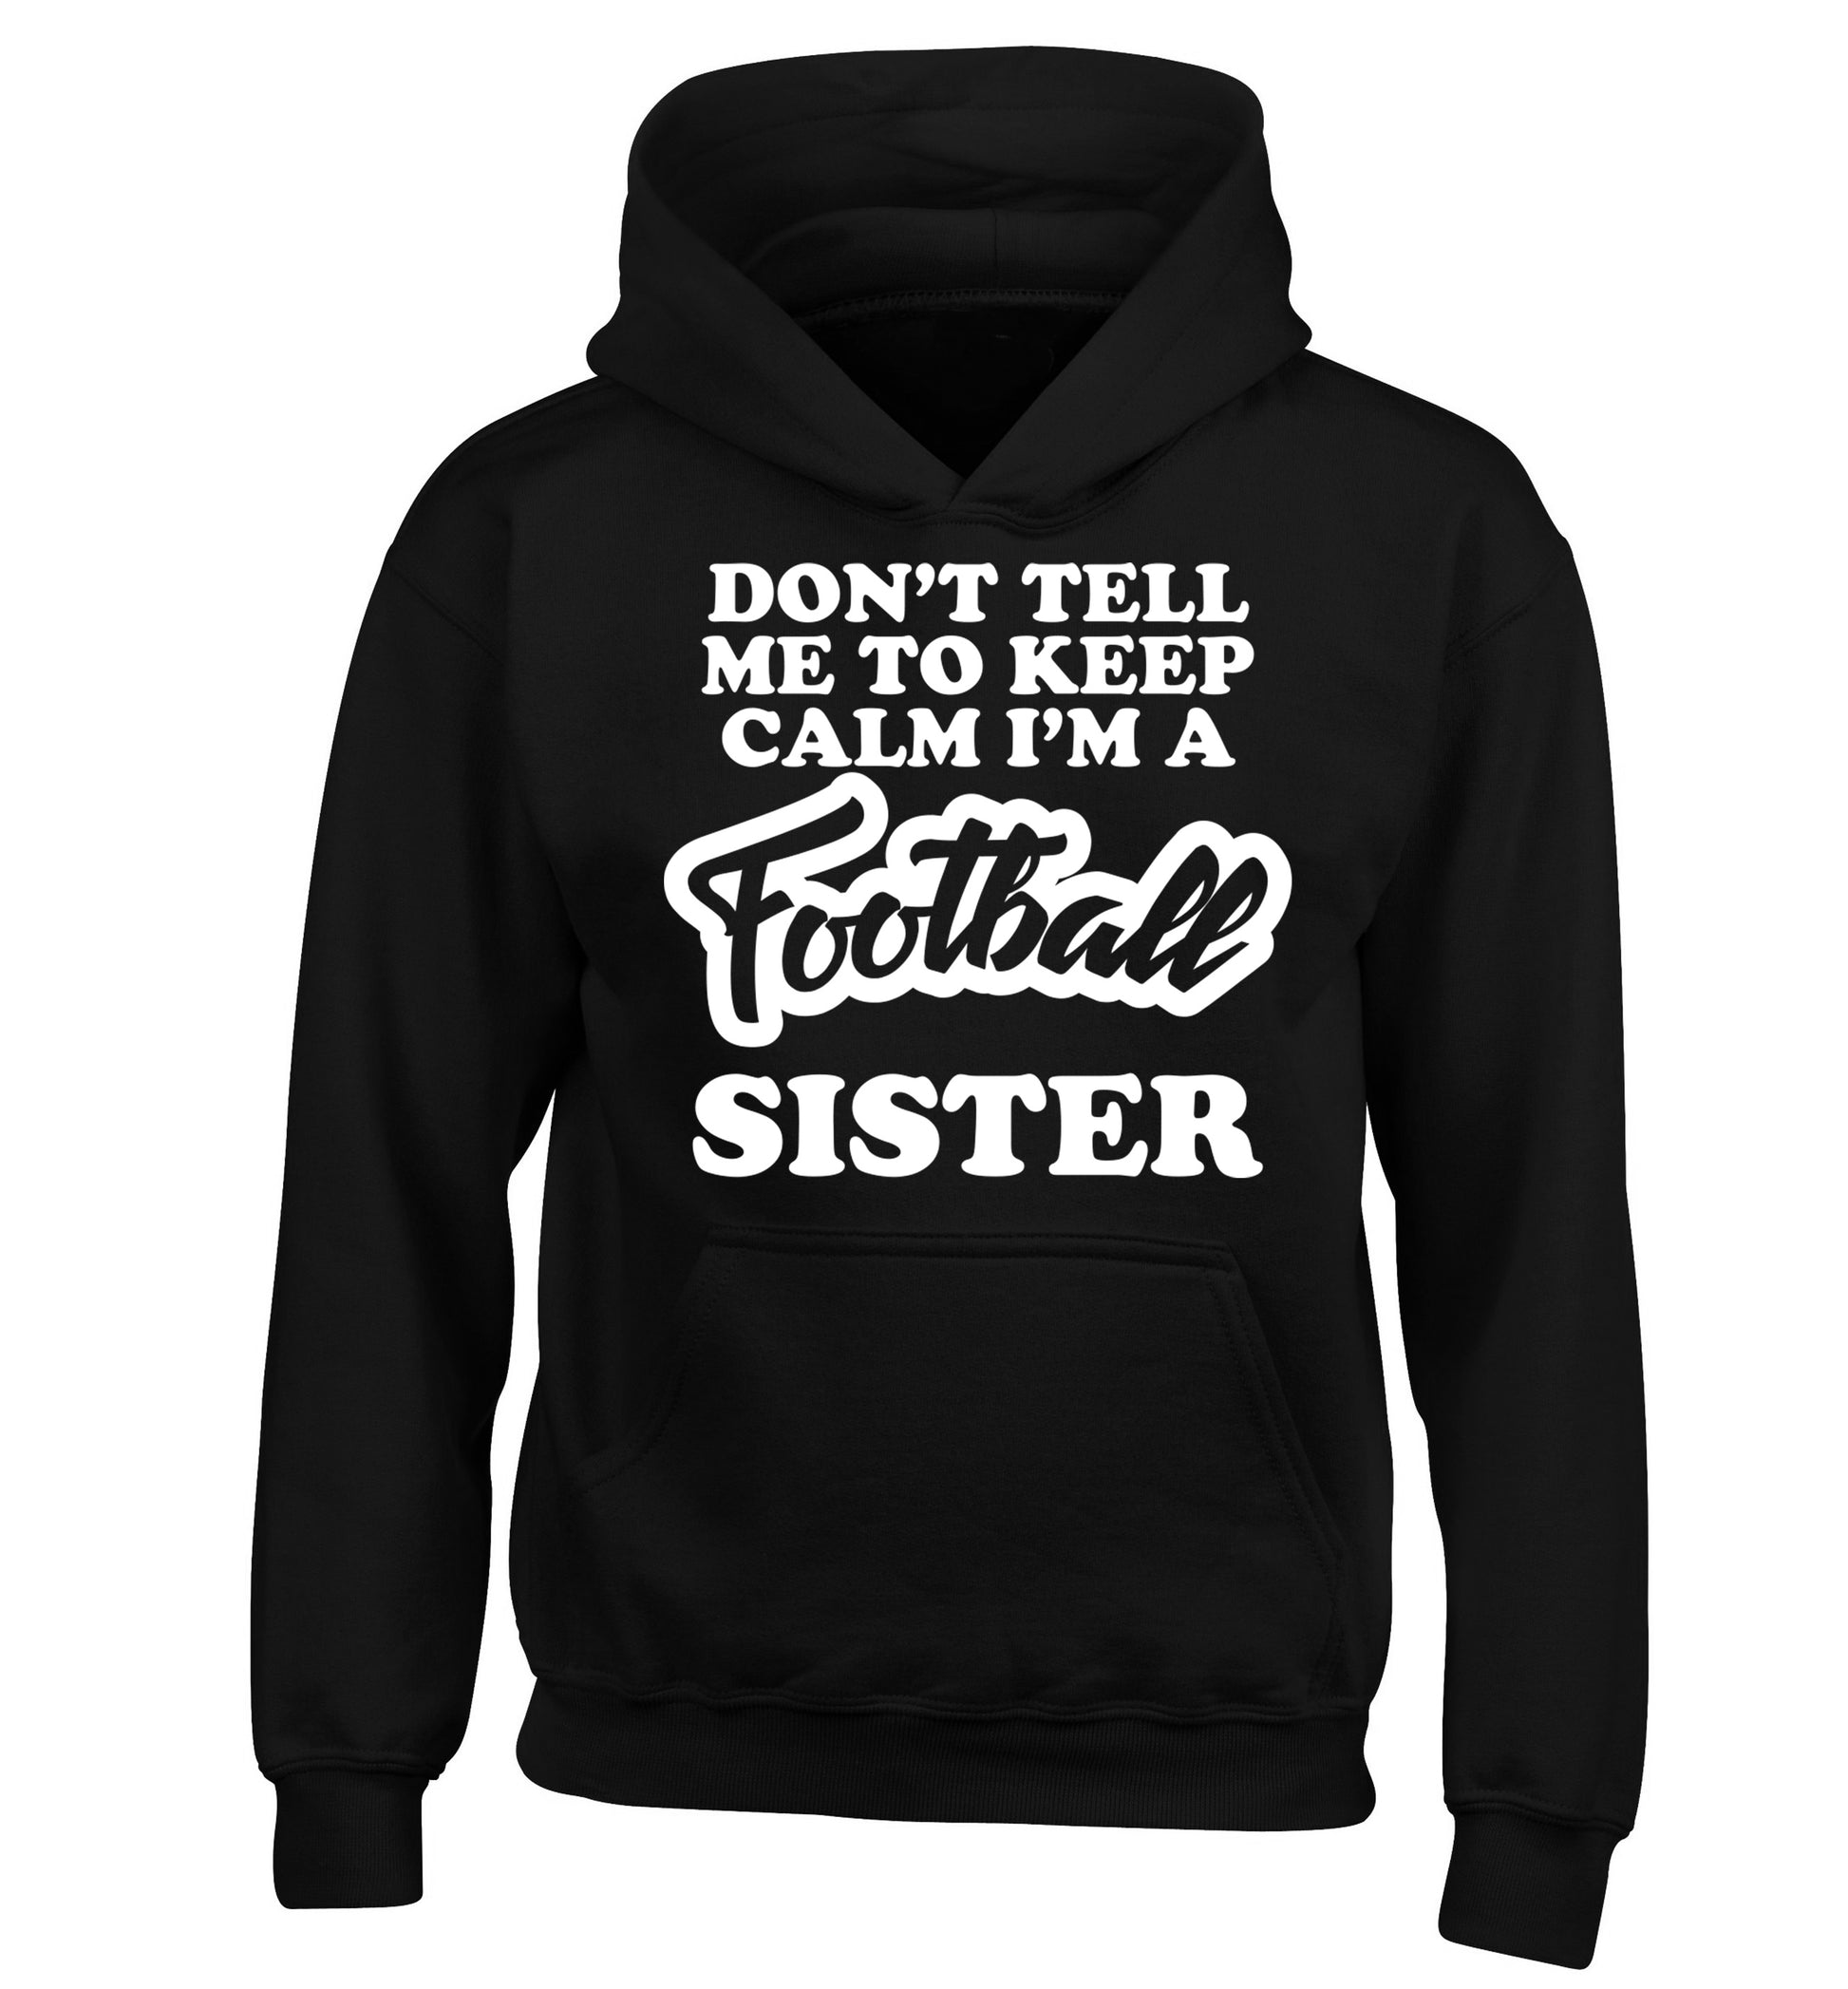 Don't tell me to keep calm I'm a football sister children's black hoodie 12-14 Years